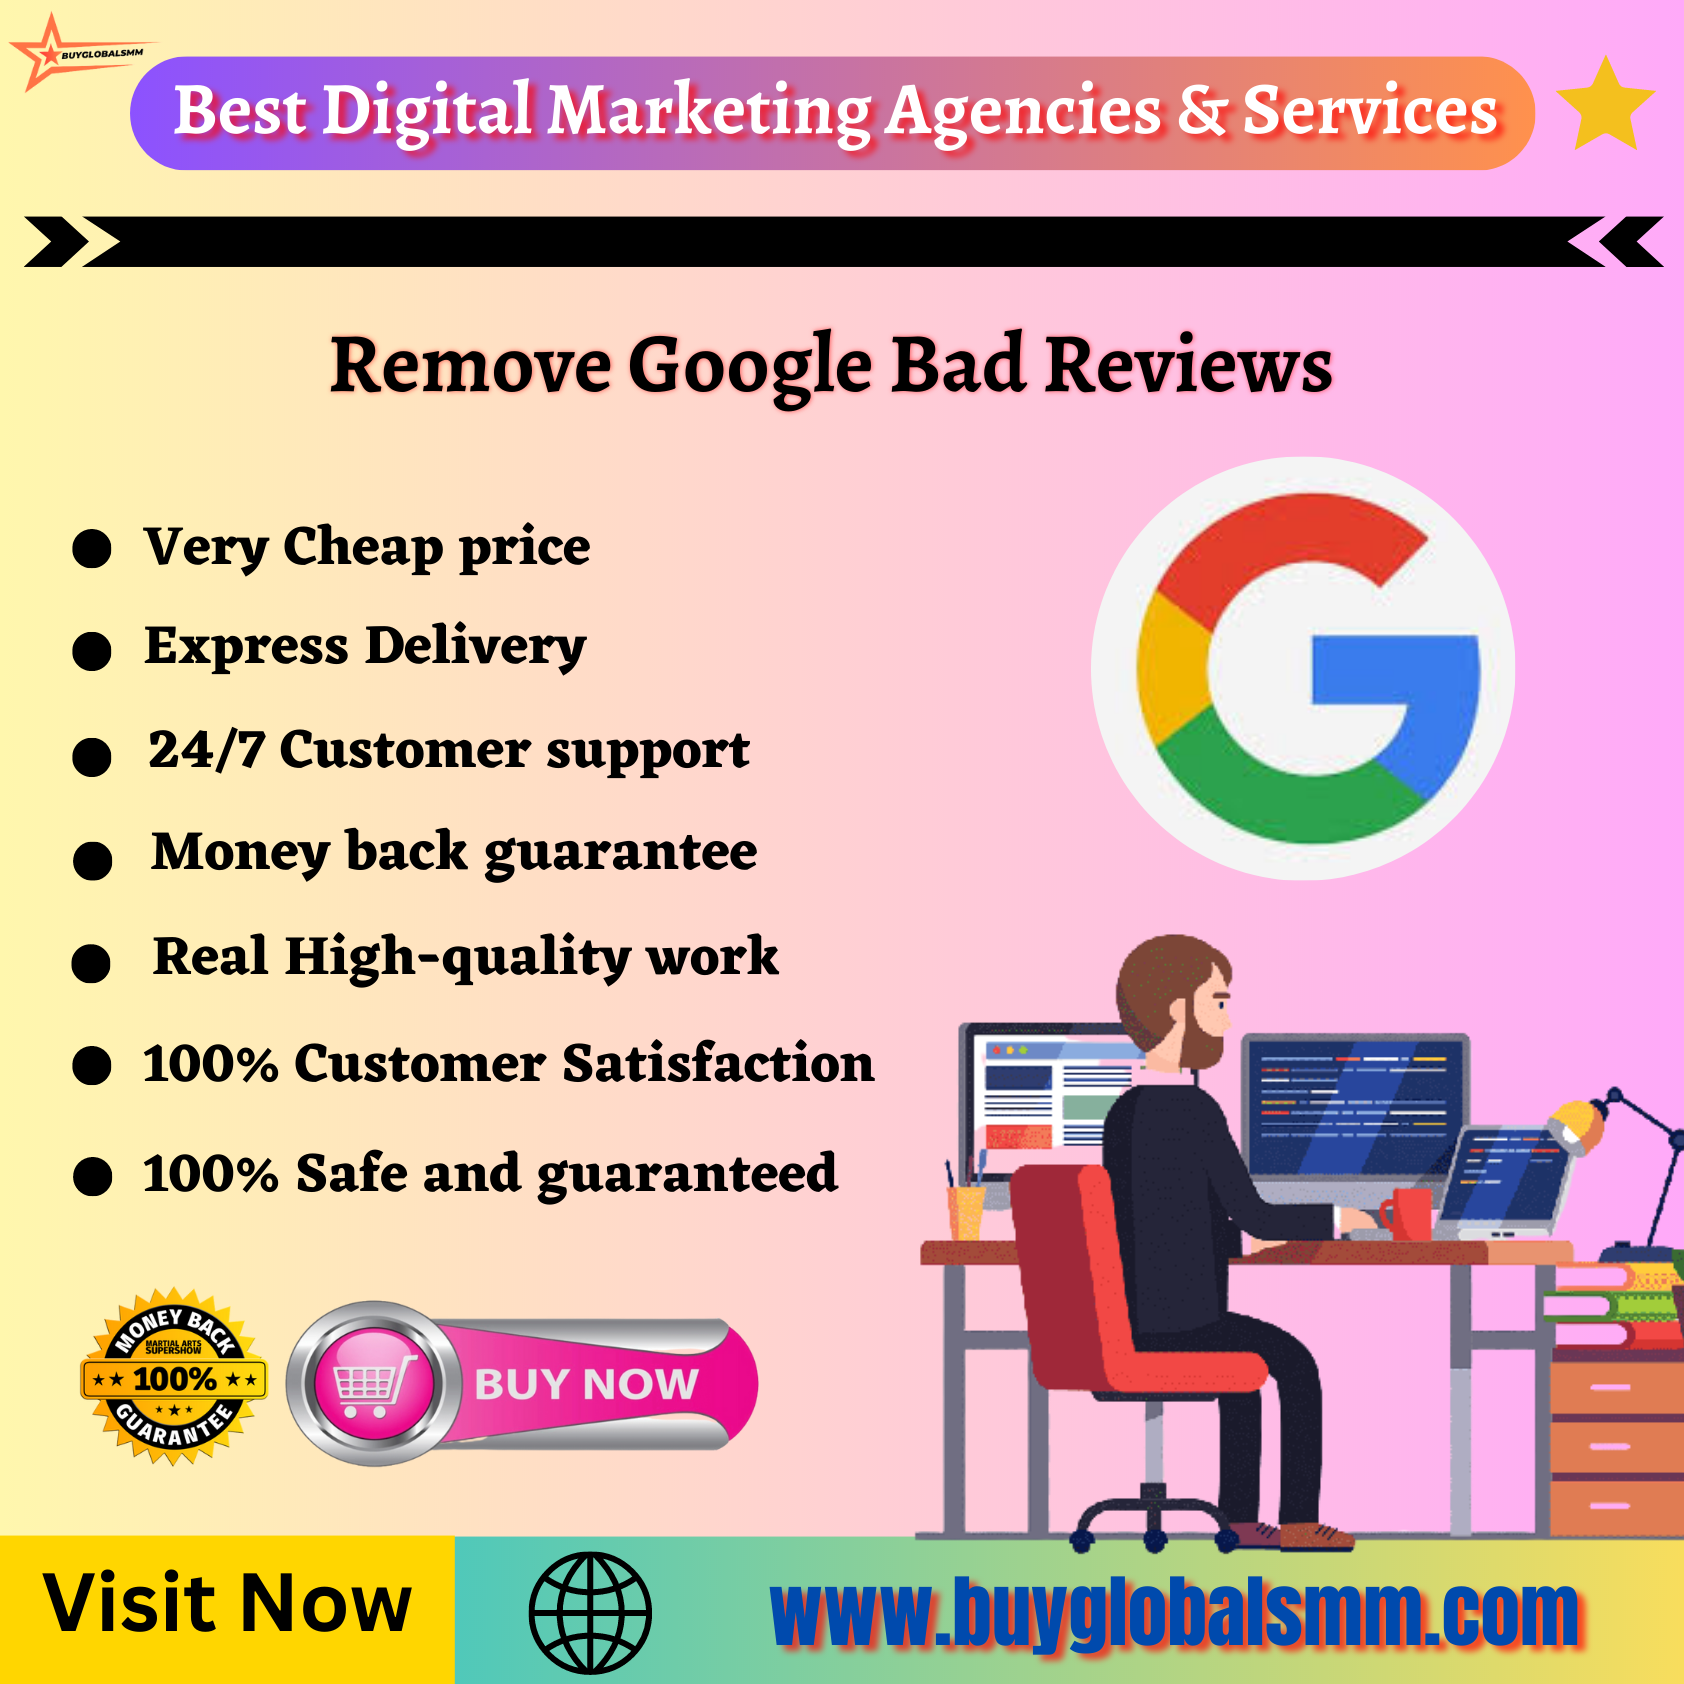 Remove Google Bad Reviews-100% trusted service